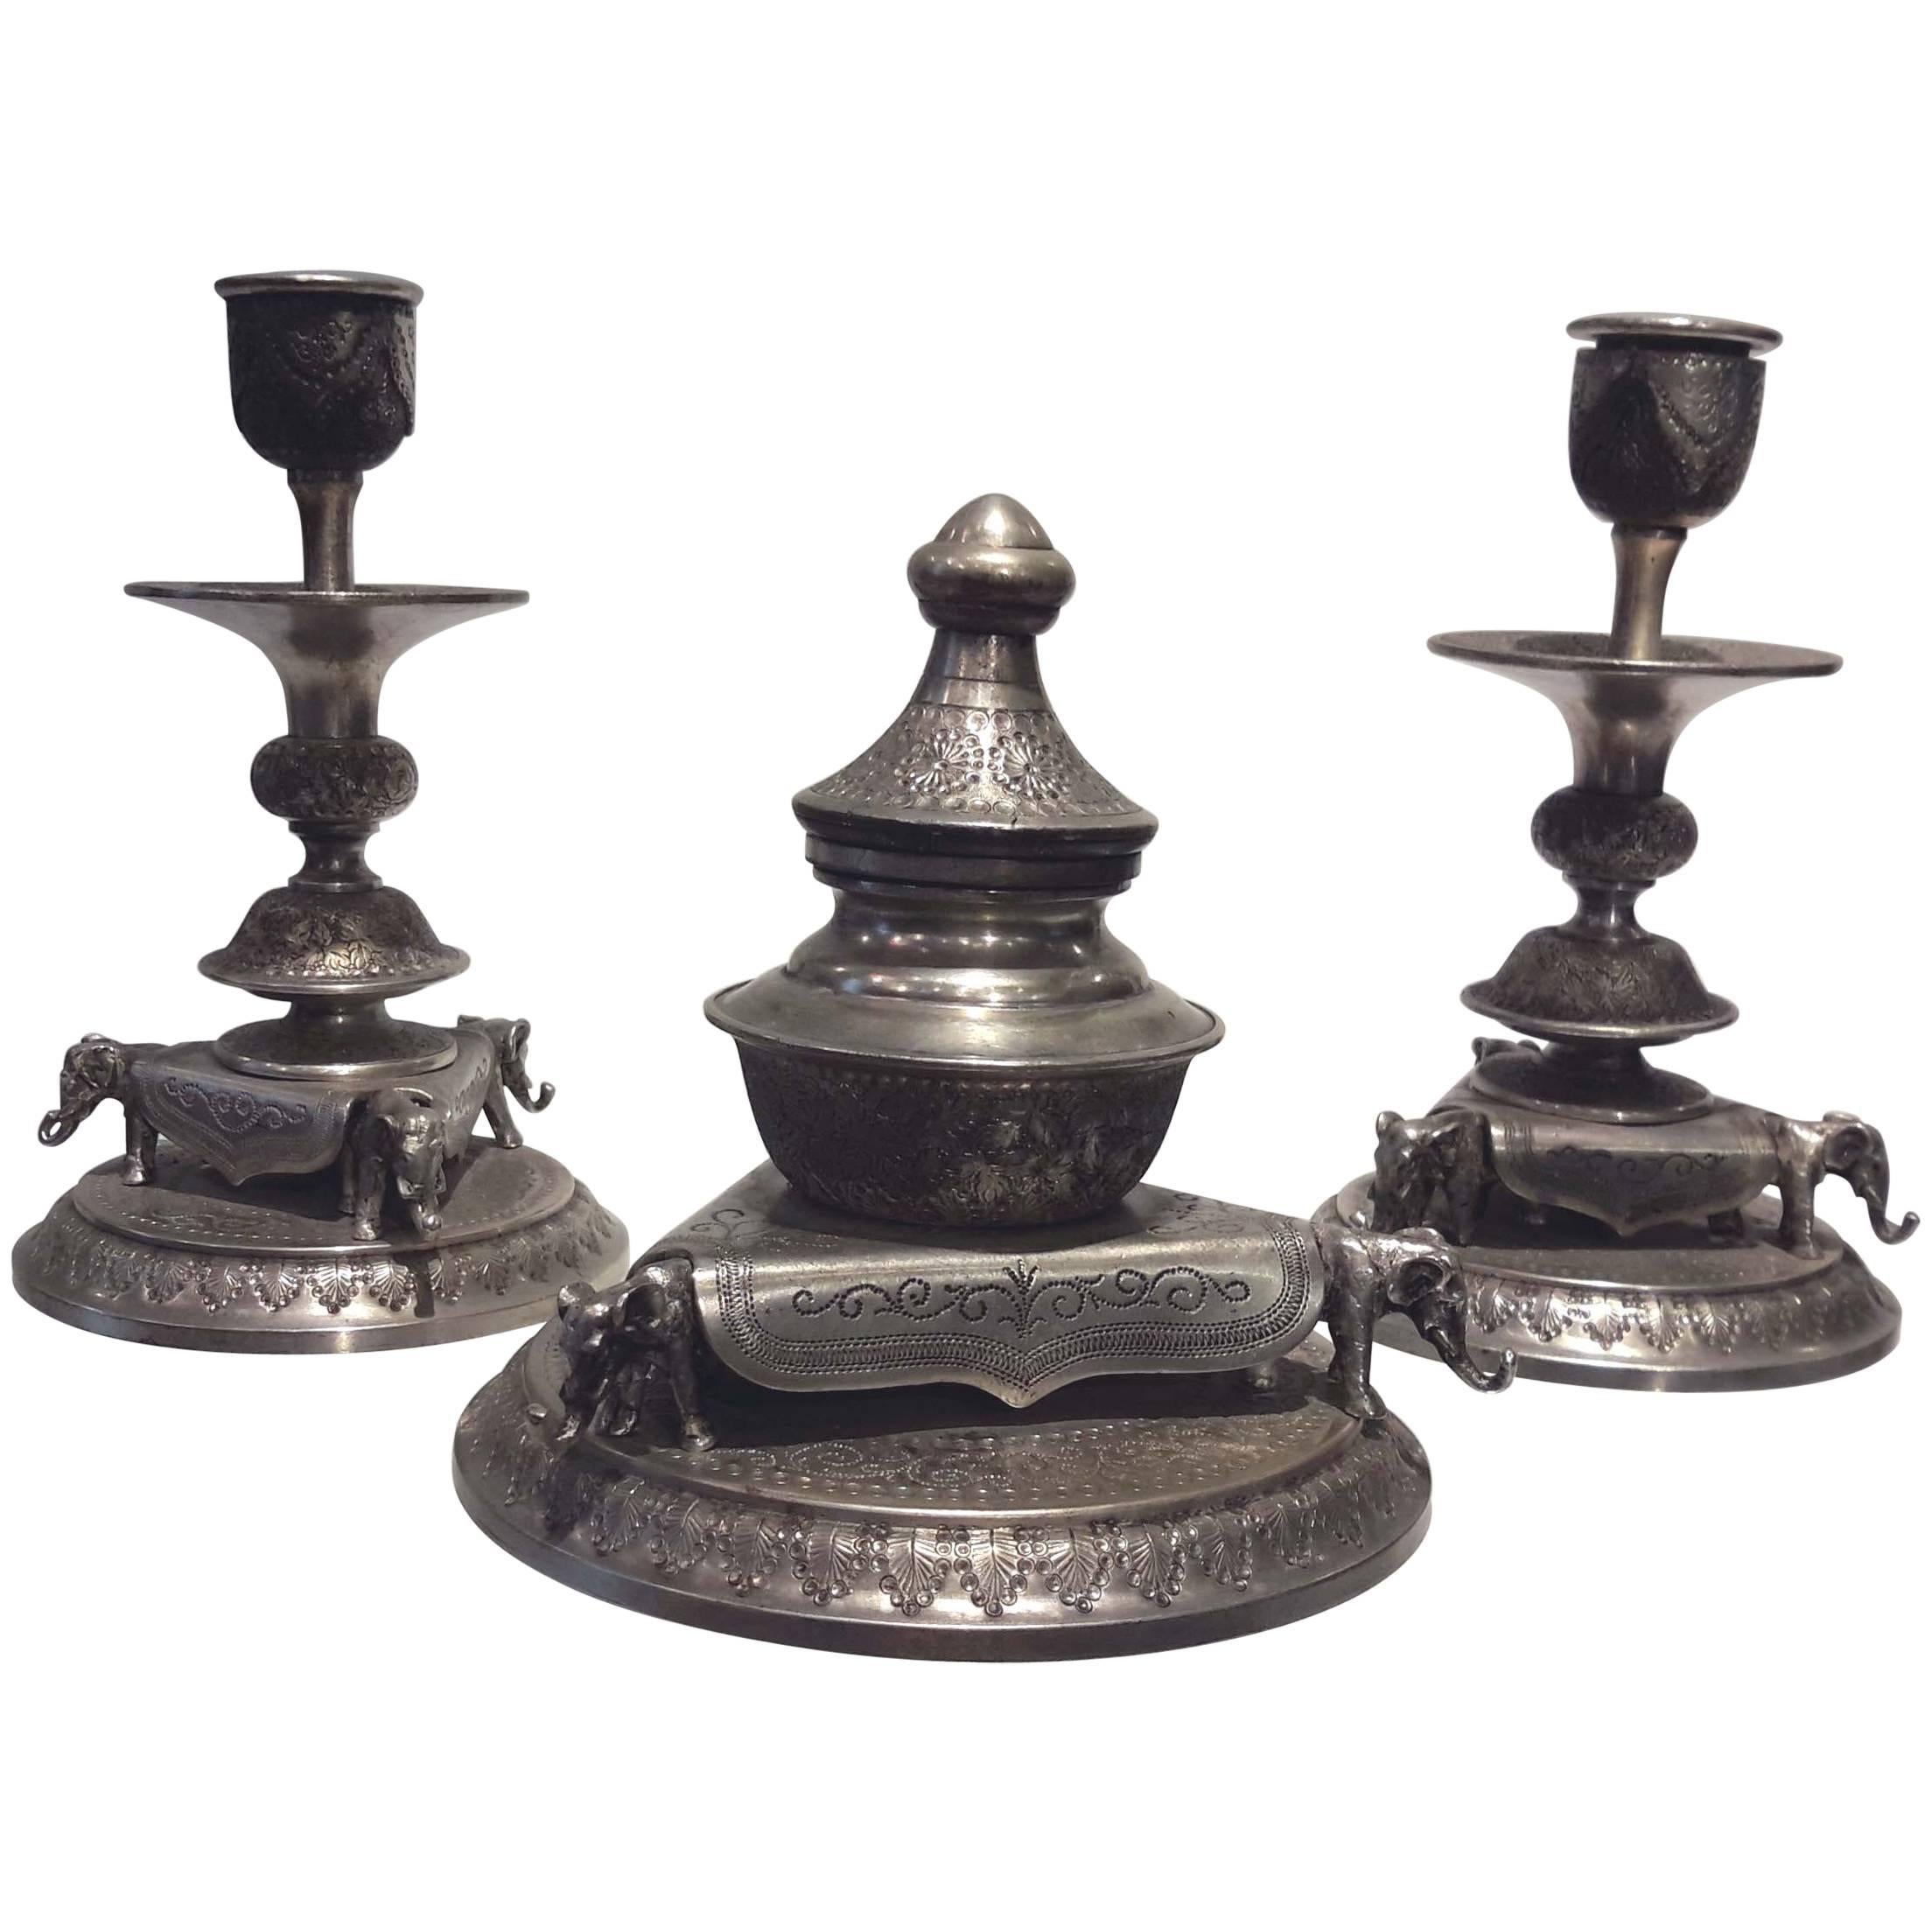 Rare 19th Century Austrian Silvered Bronze Inkwell and Candlestick Set